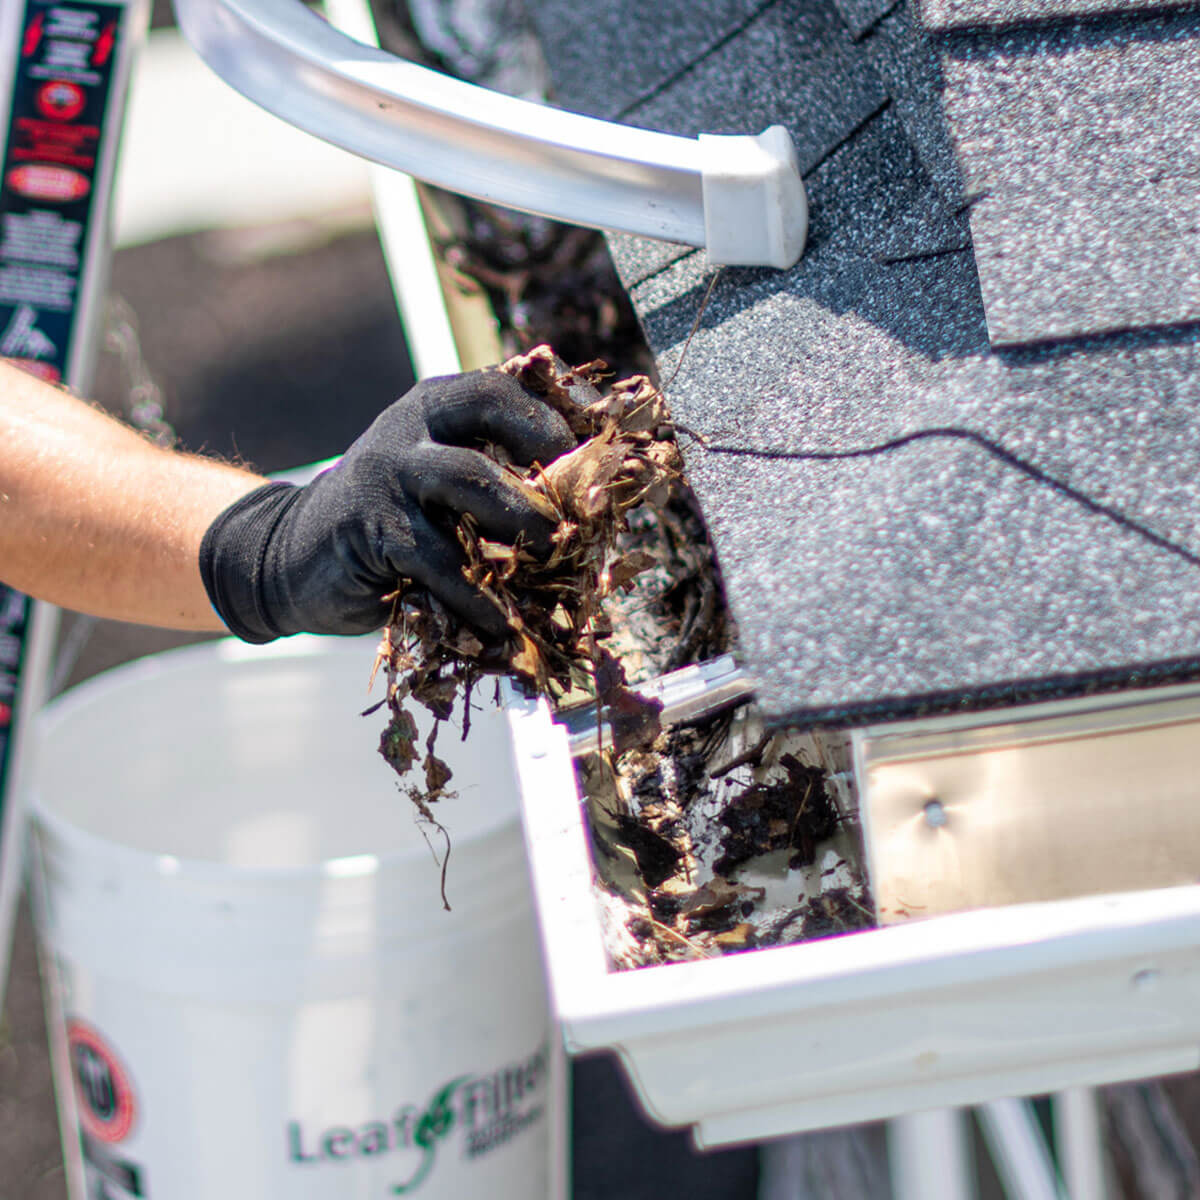 A LeafFilter installer cleans debris from clean, white gutters and places it in a white branded buckets.